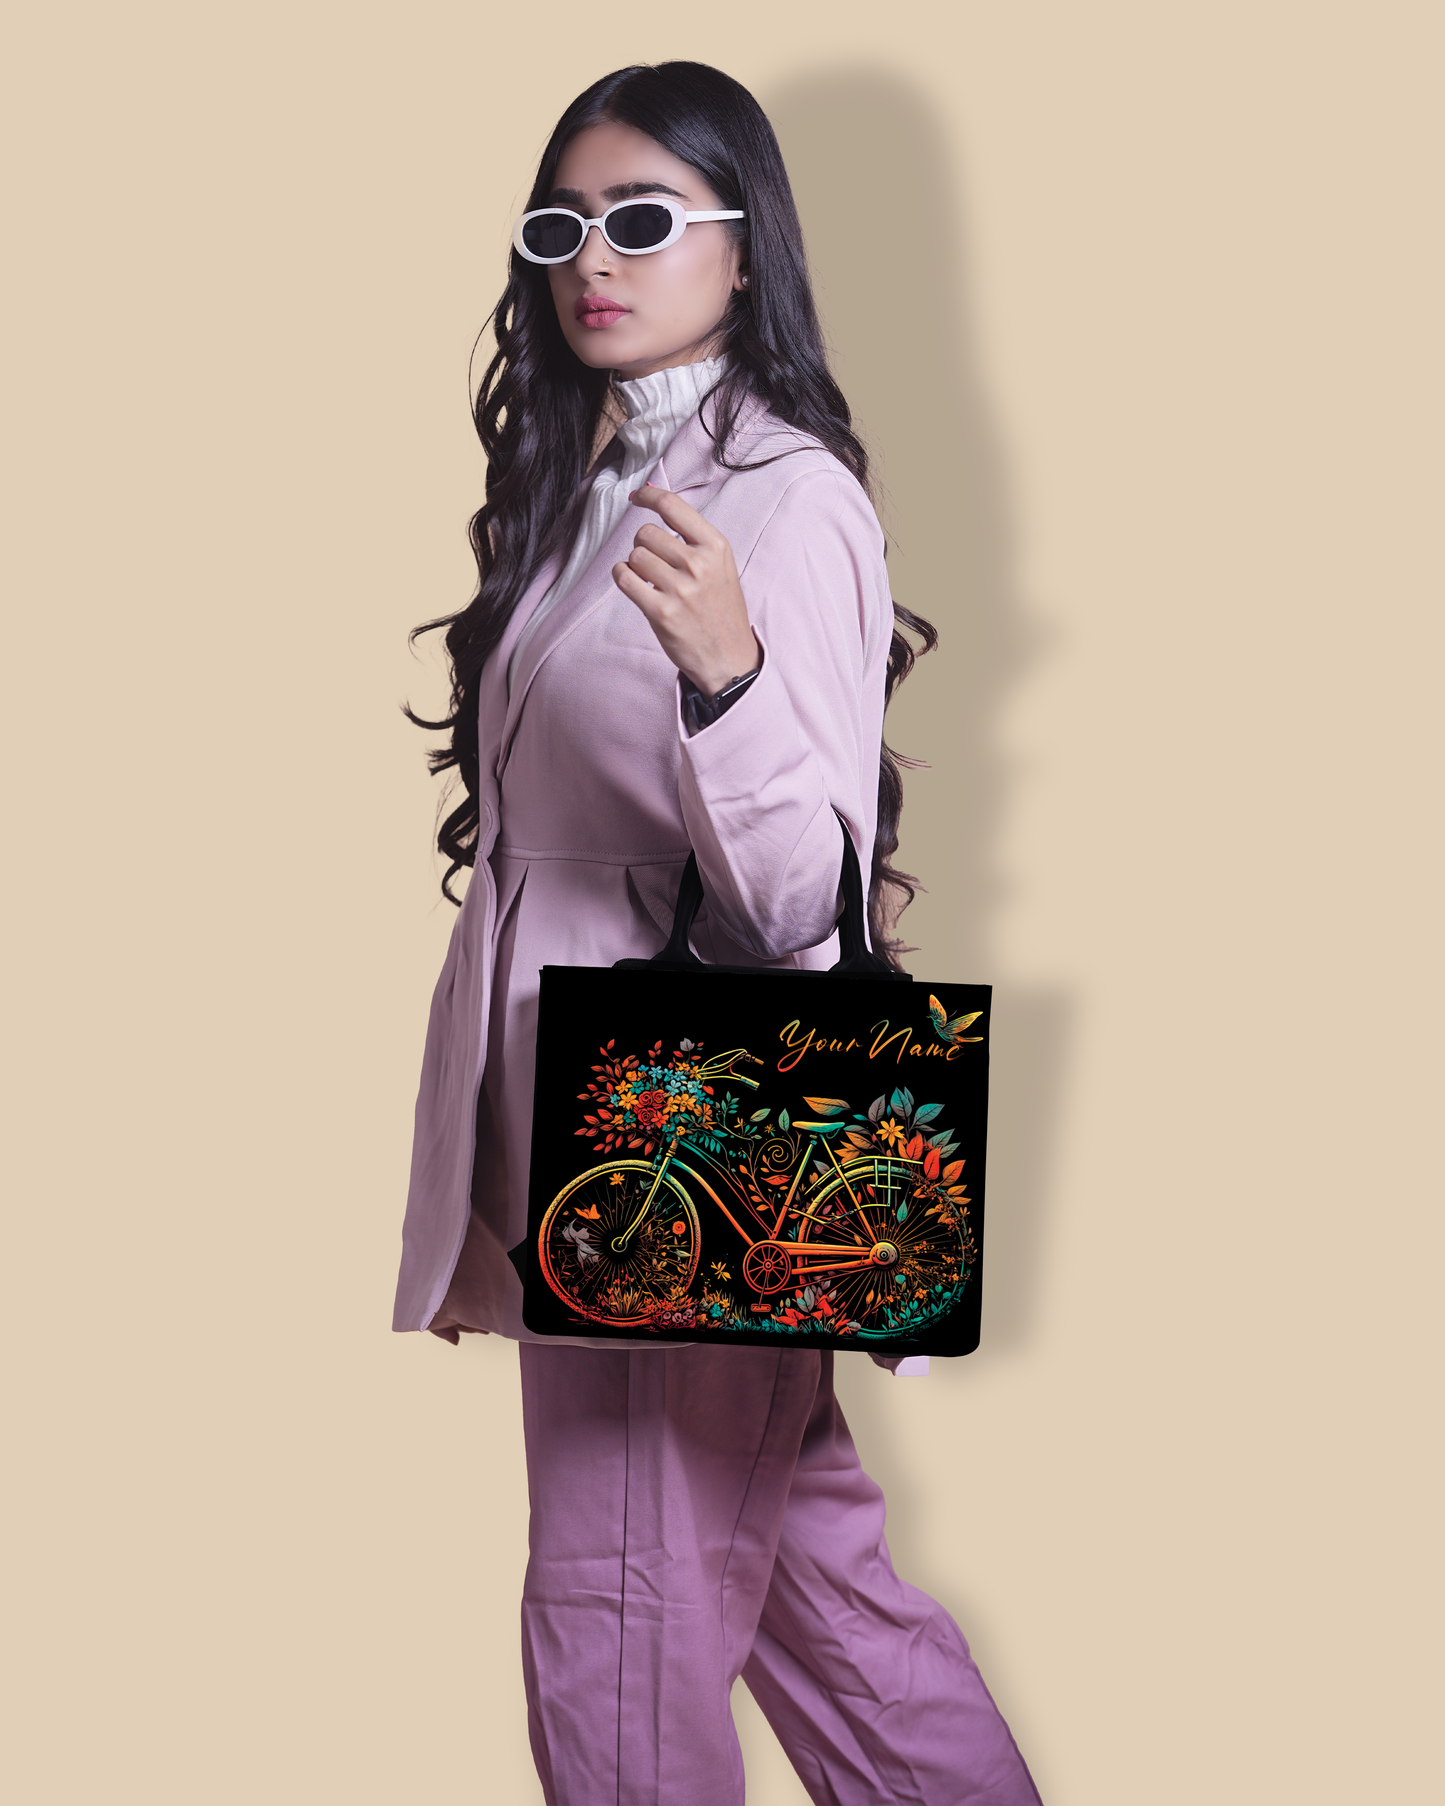 Personalized Small Tote Bag Designed With Growing Nature On Colourfull Bicycle